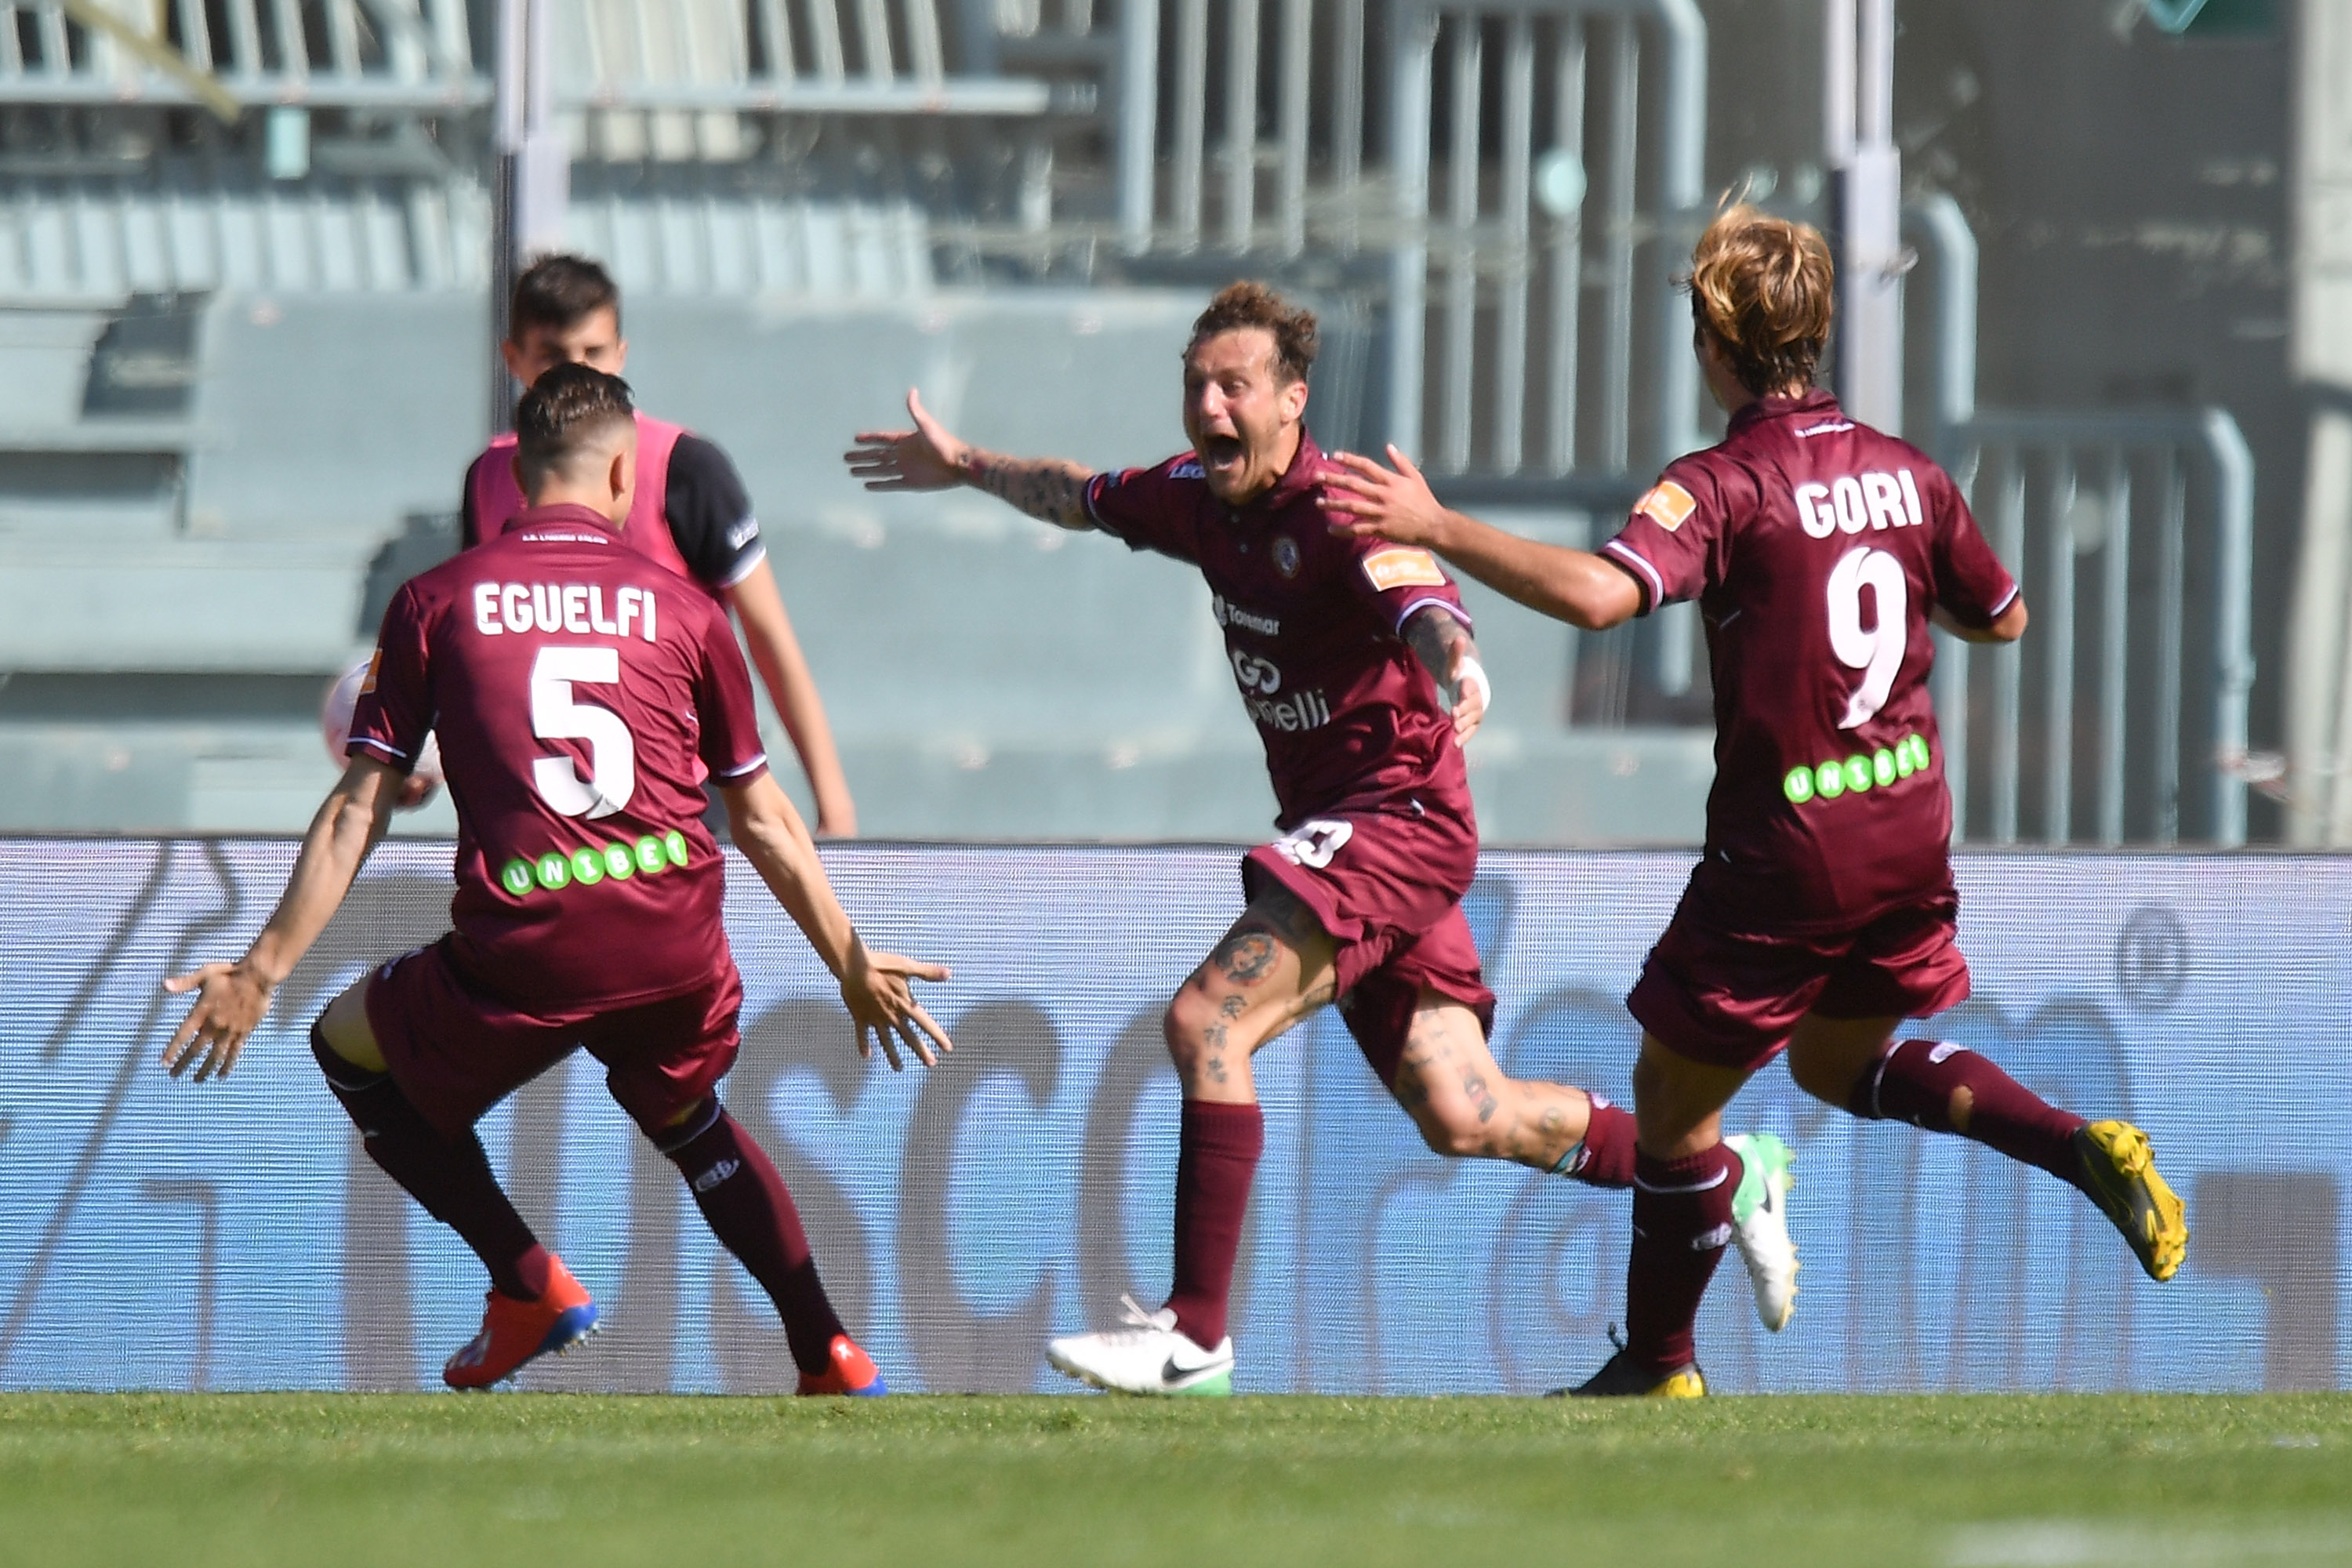 LIVORNO, ITALY - APRIL 27: Alessandro Diamanti of Livorno celebrates after scoring the first equalizing goal (1-1) during the Serie B match between AS Livorno and US Citta di Palermo at Stadio Armando Picchi on April 27, 2019 in Livorno, Italy. (Photo by Tullio M. Puglia/Getty Images)